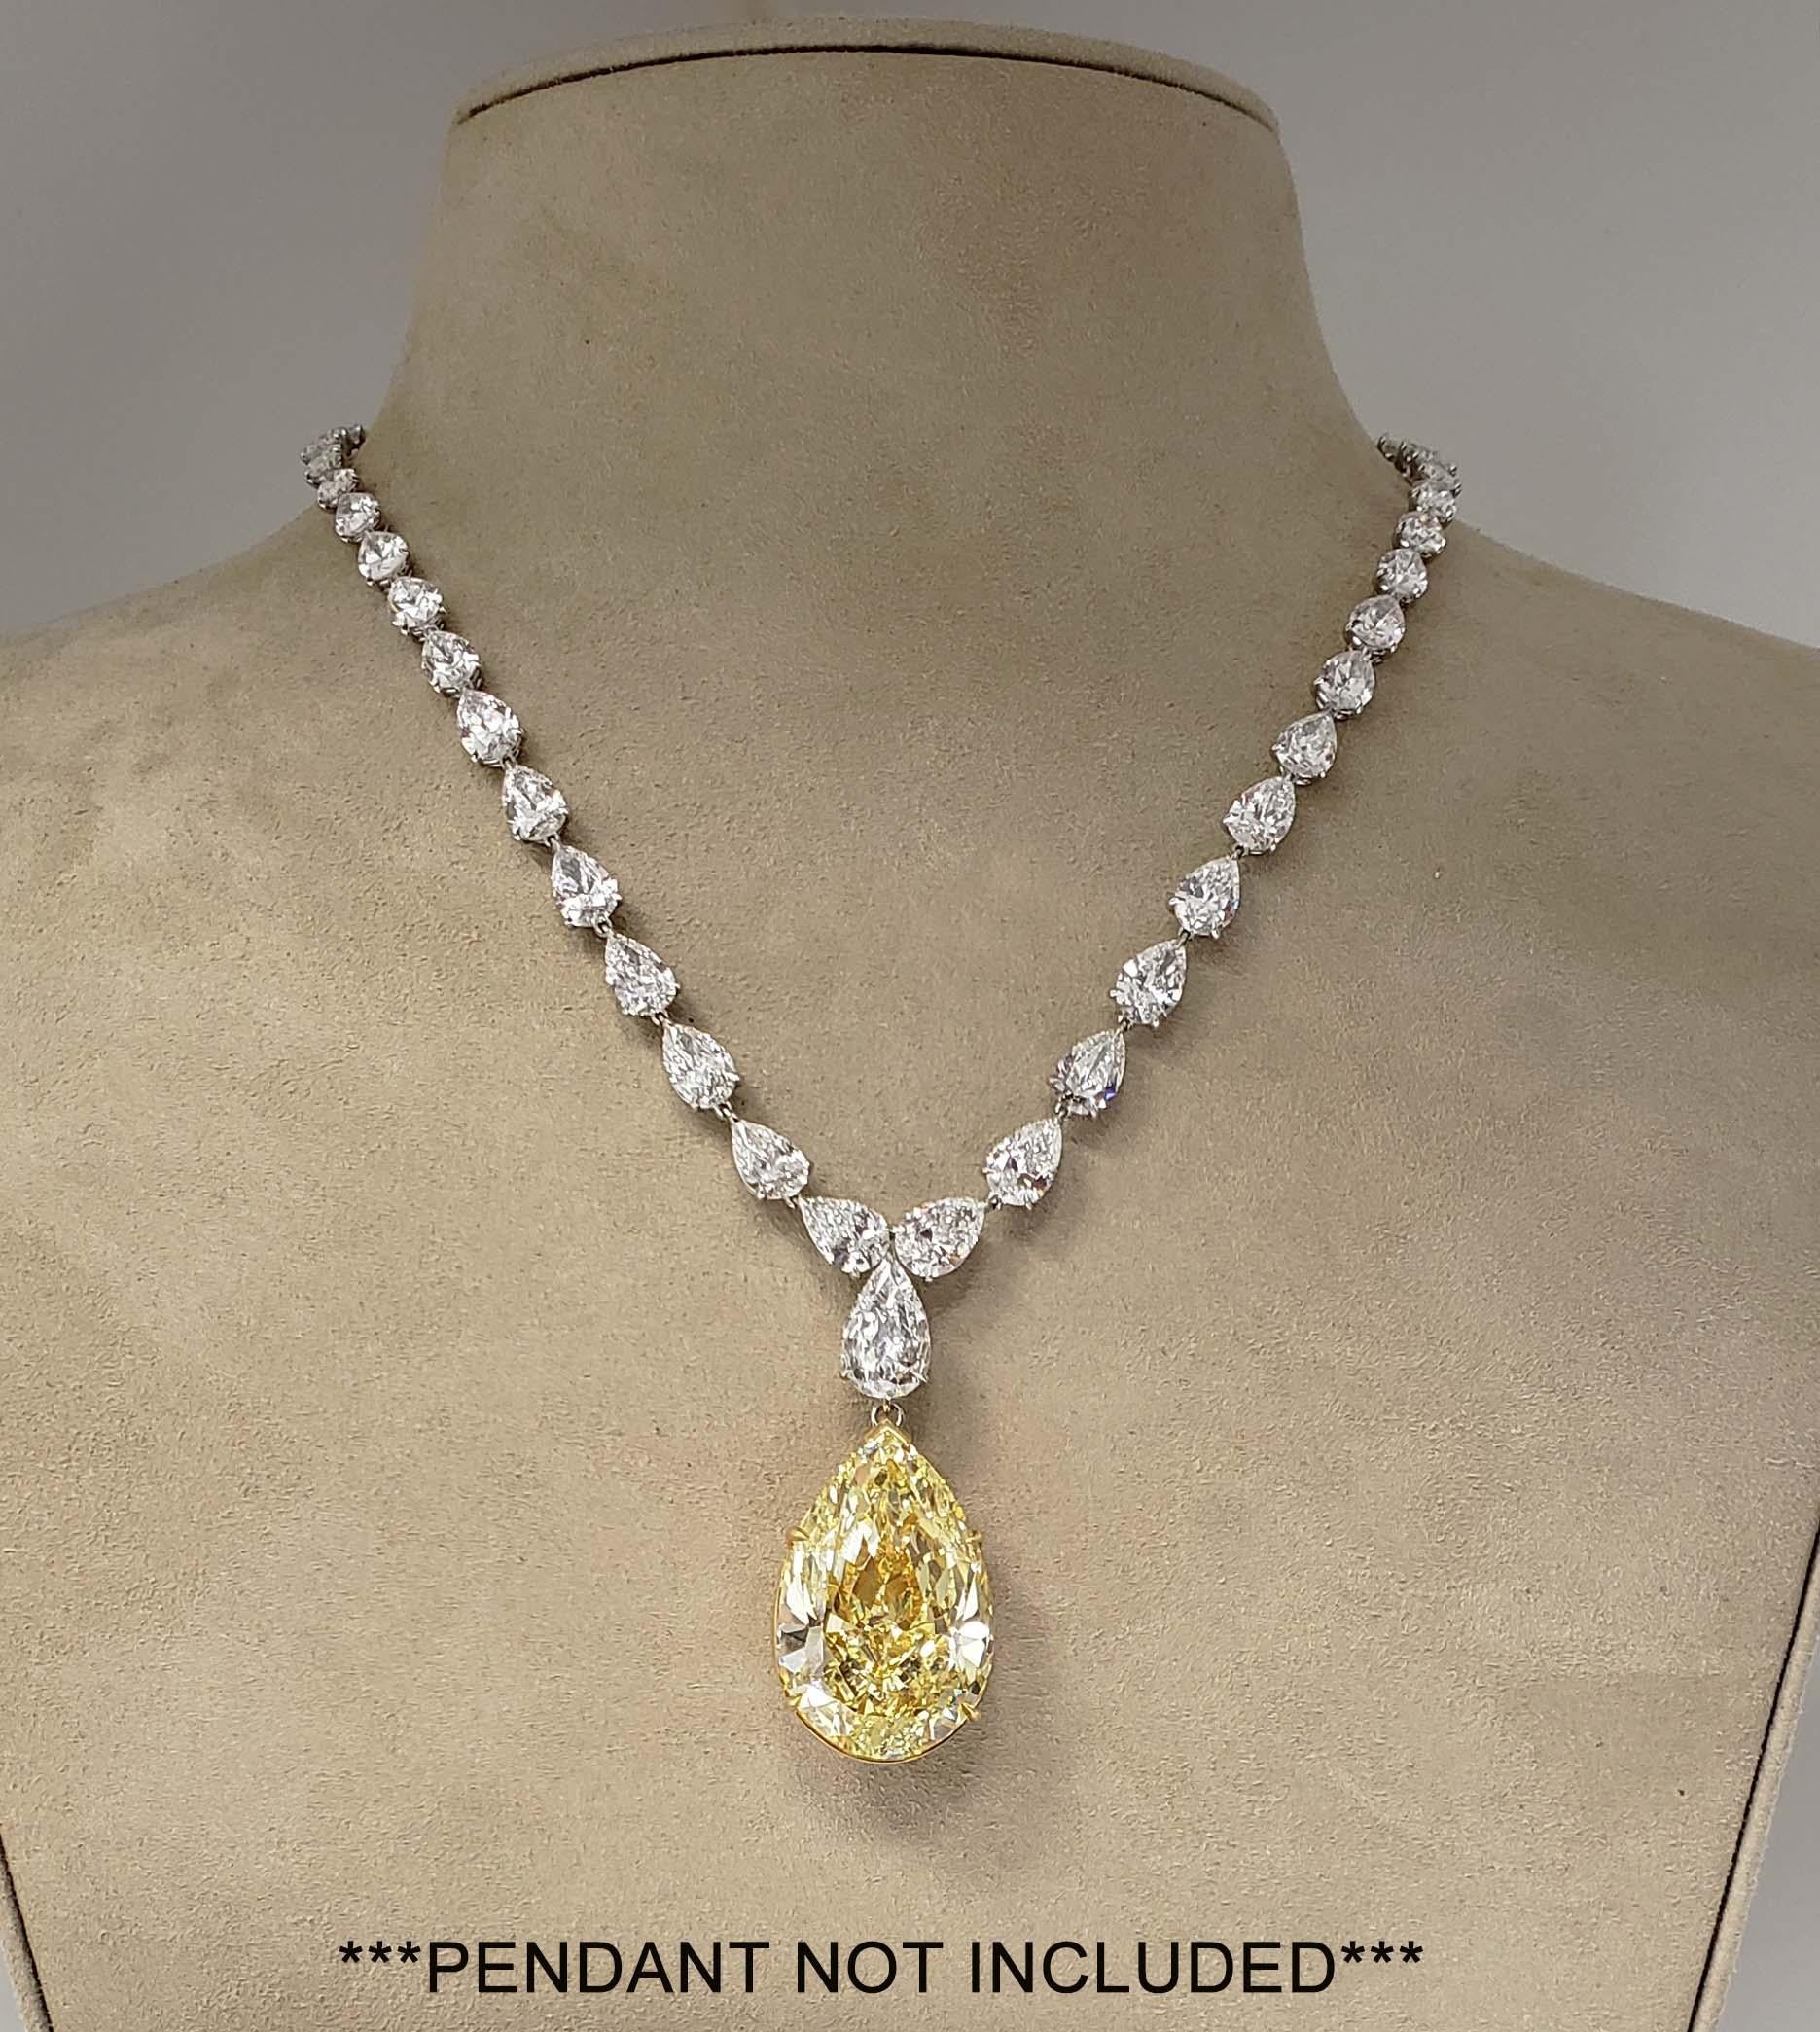 Scarselli 31 Carat Pear Cut Diamond Tennis Necklace in Platinum GIA Certified In New Condition For Sale In New York, NY